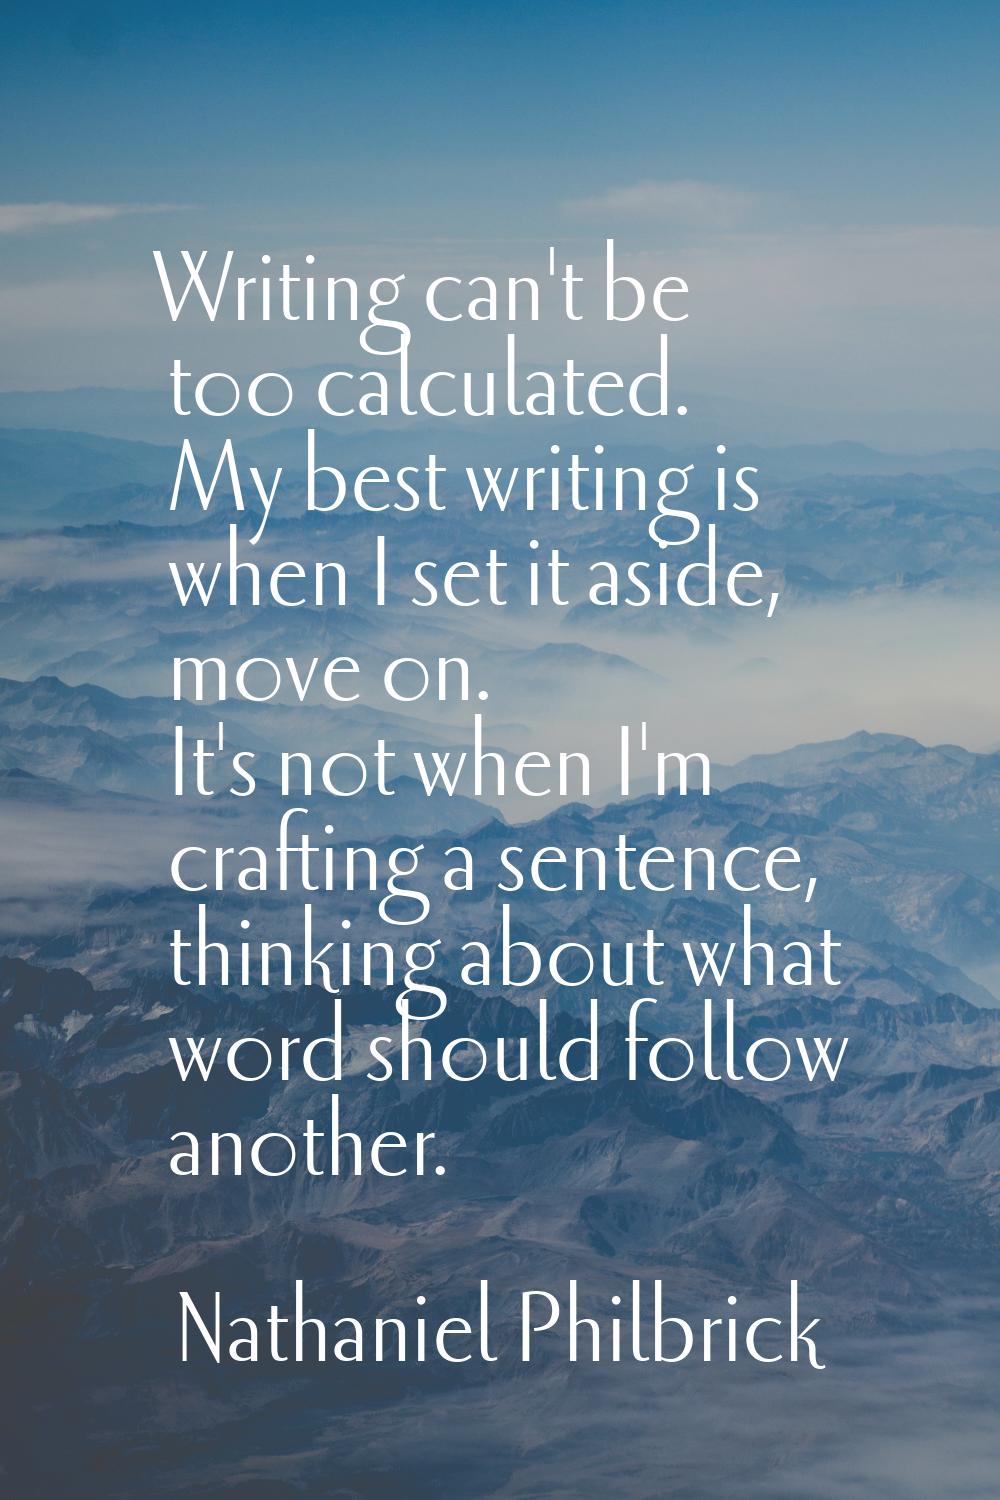 Writing can't be too calculated. My best writing is when I set it aside, move on. It's not when I'm